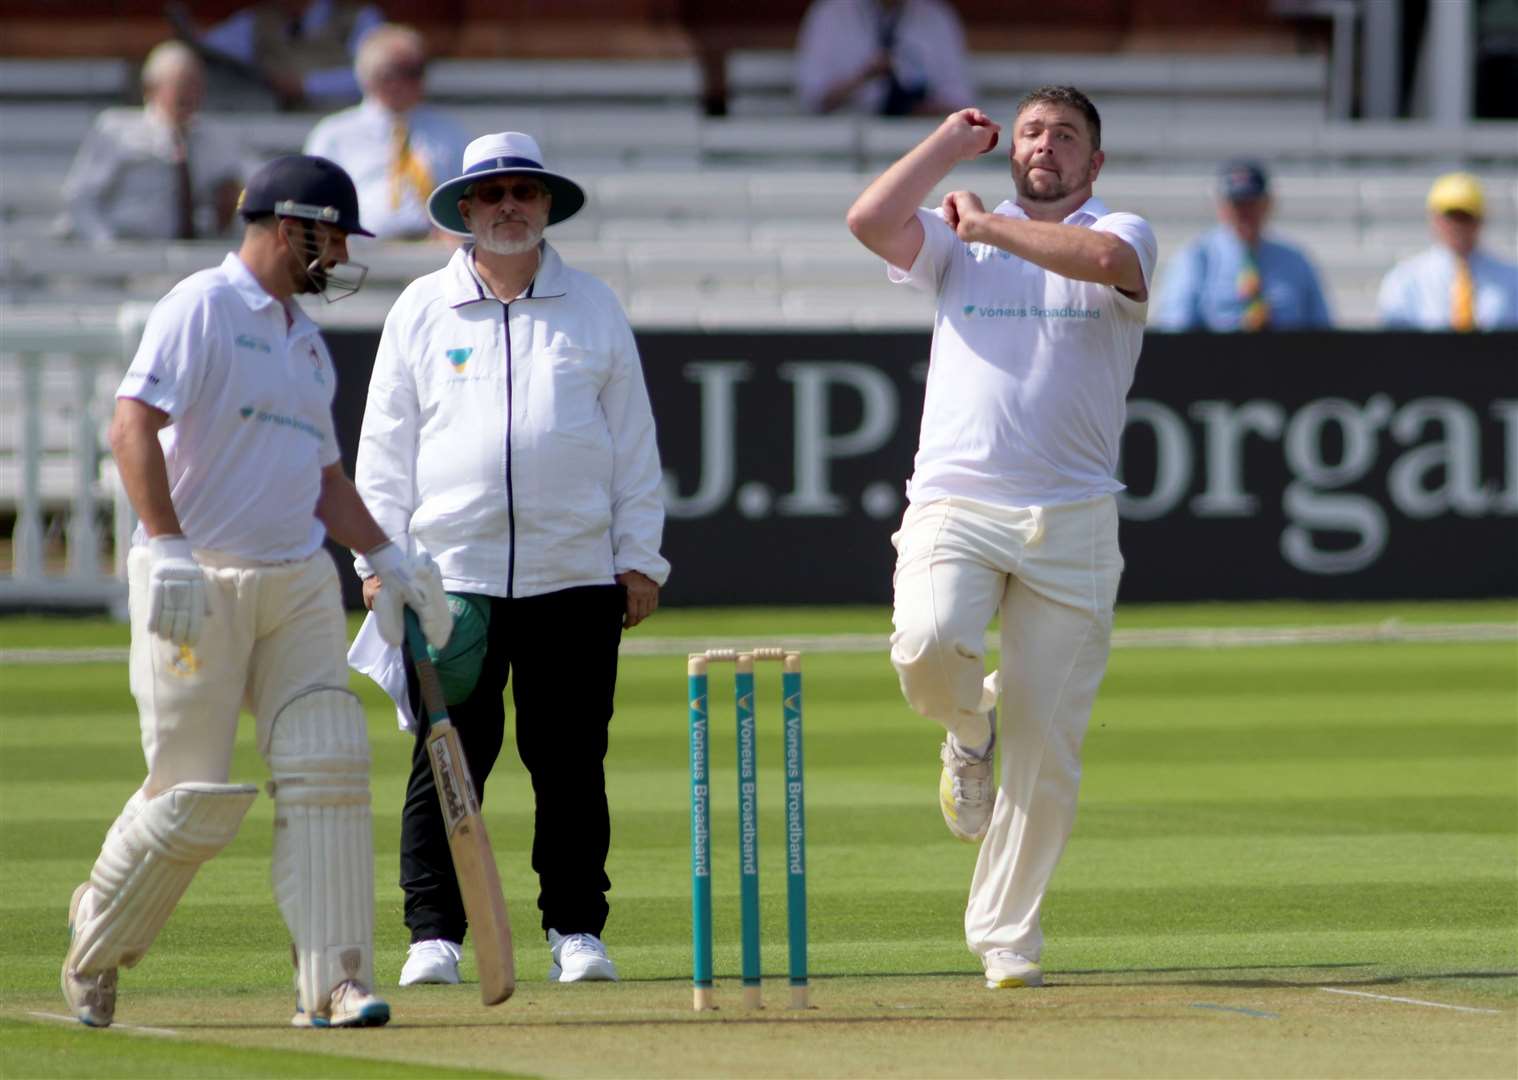 Neil Dibben impressed with the ball for Leeds & Broomfield at the start of Milford Hall’s innings. Picture: Barry Goodwin